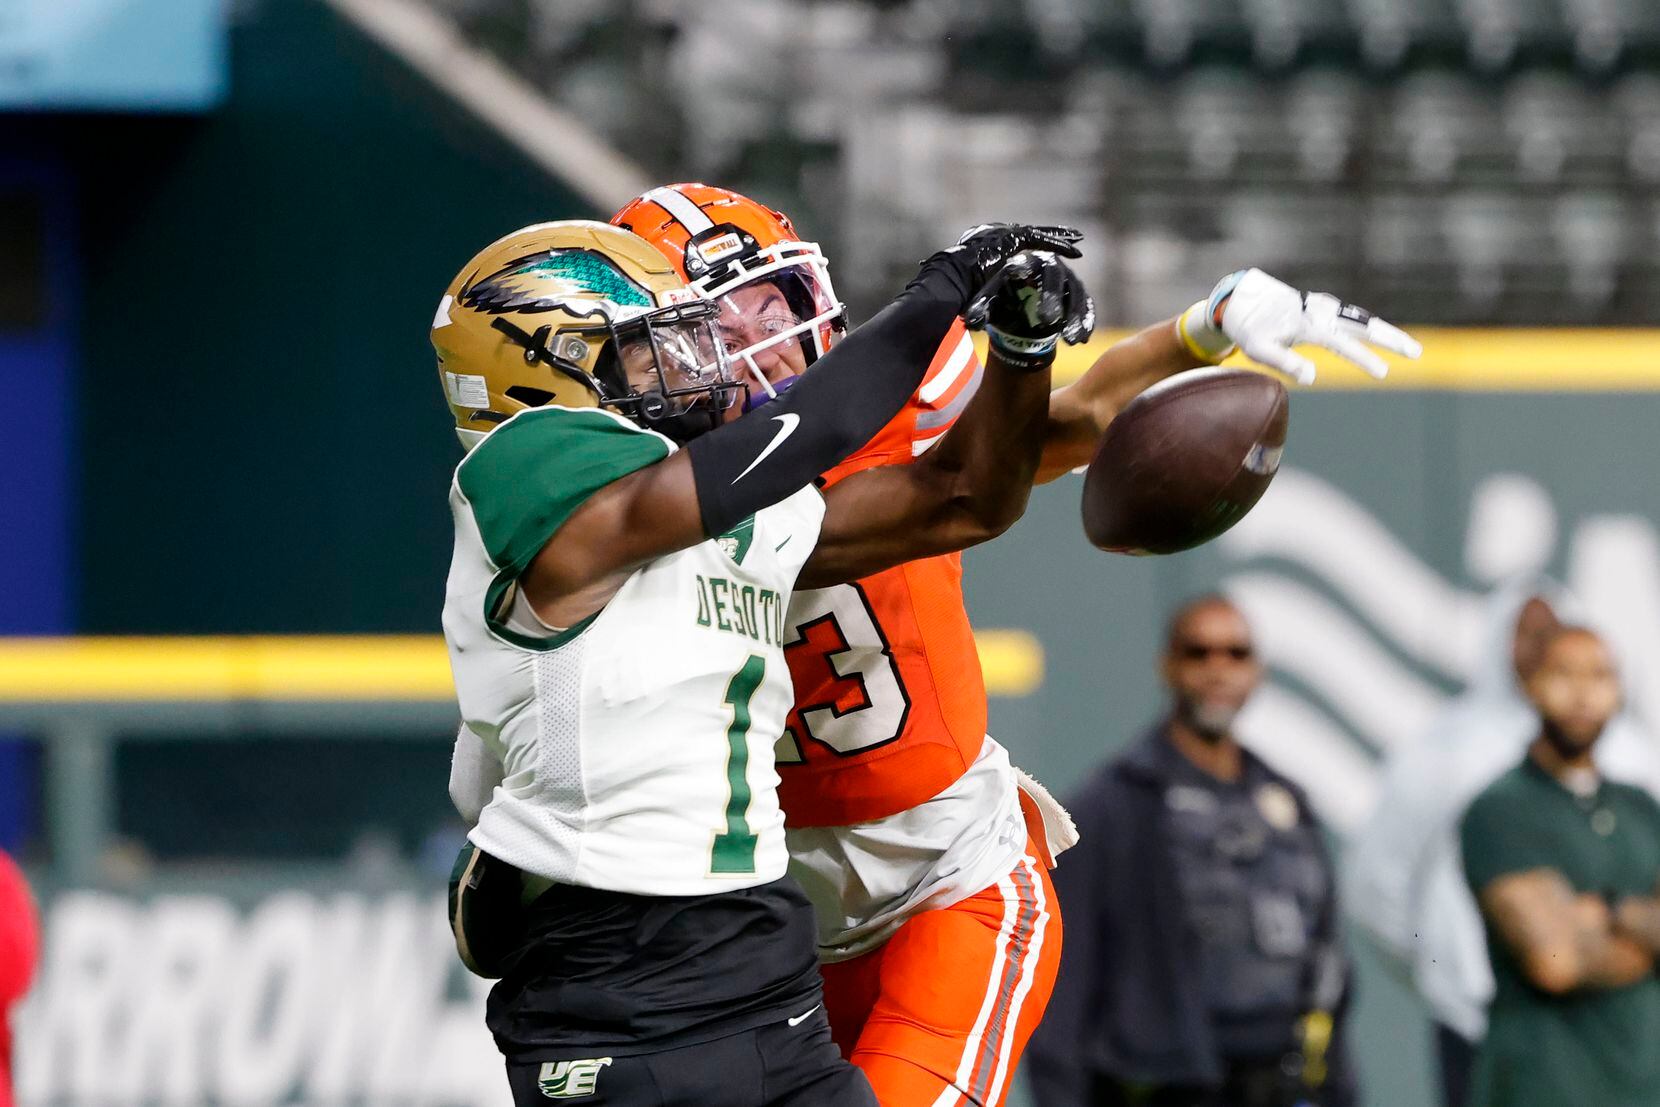 Rockwall defender Cadien Robinson (13) defends a pass intended for DeSoto receiver Johnny...